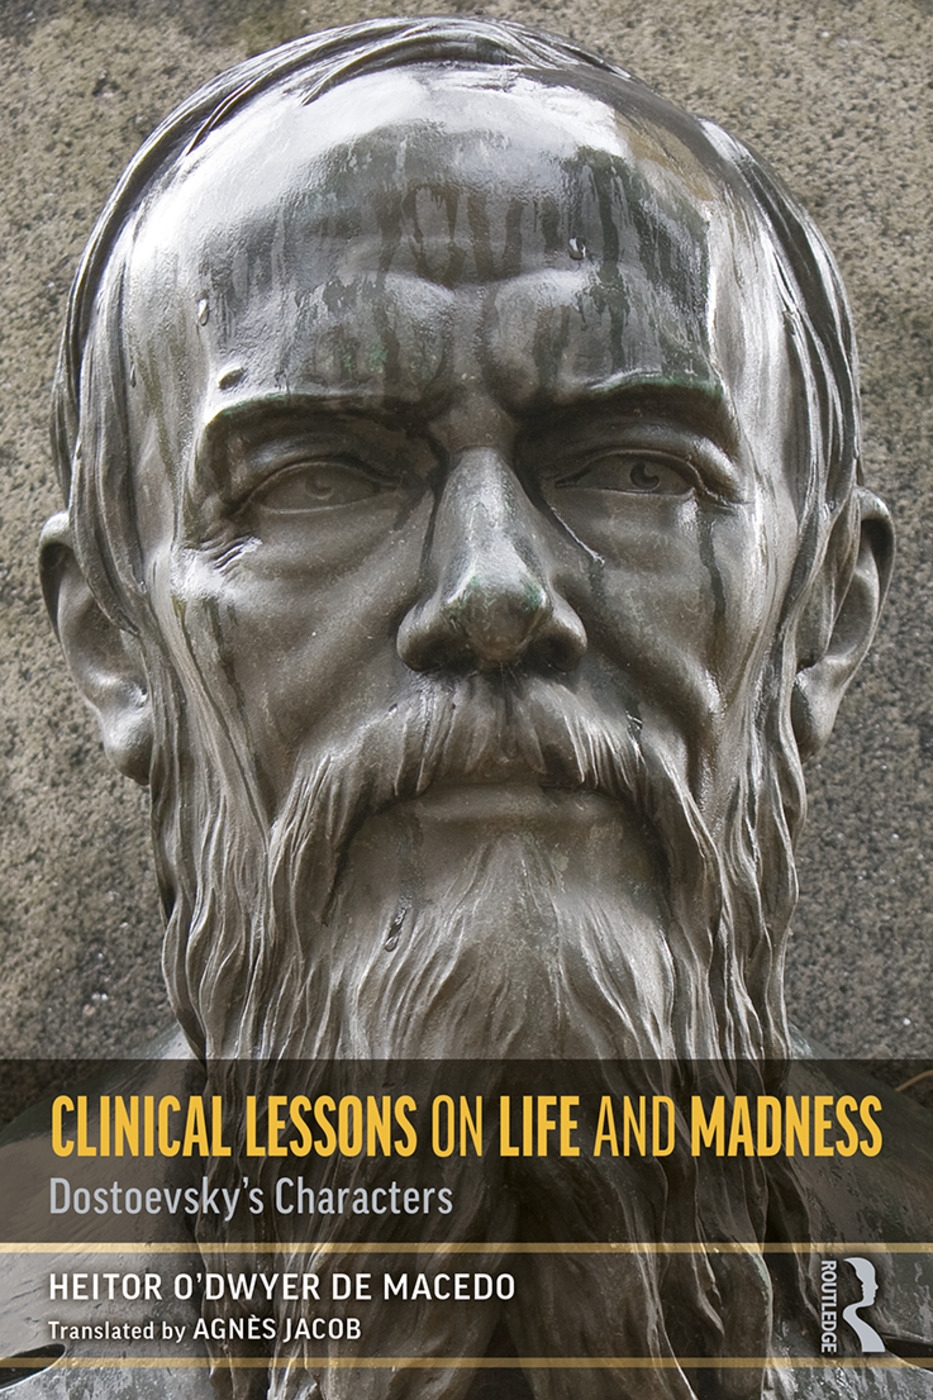 Clinical Lessons on Life and Madness: Dostoevsky’s Characters